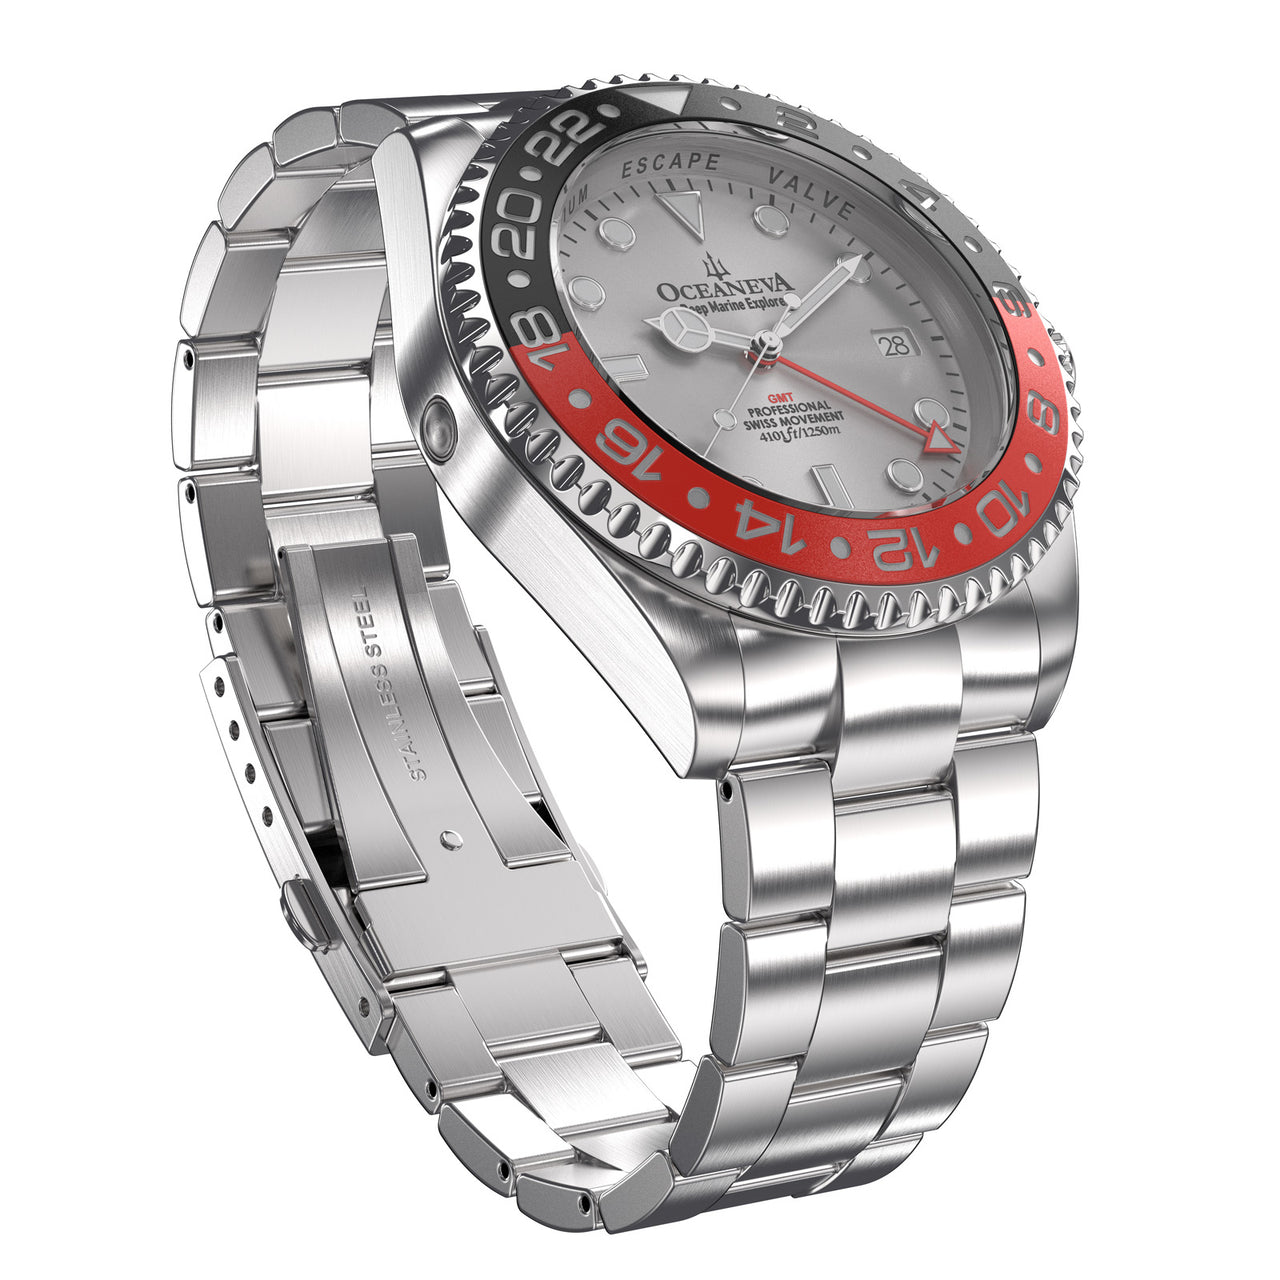 Oceaneva 1250M GMT Dive Watch Silver Red And Black Front Picture Slight Right Slant View